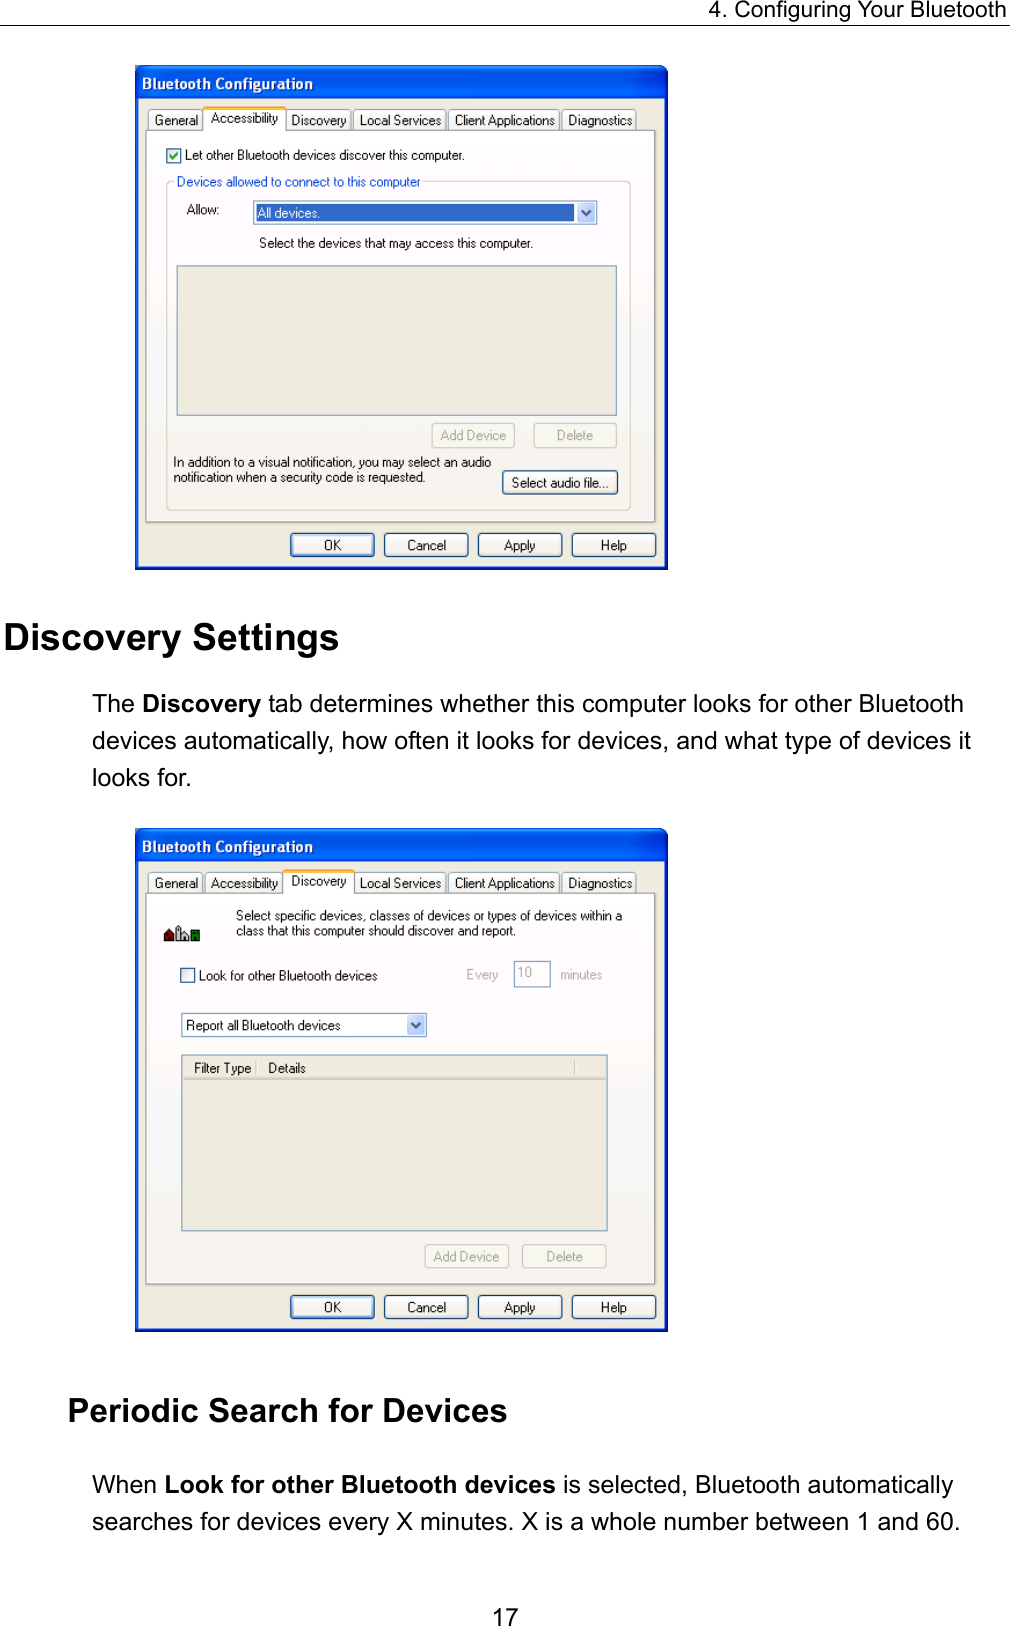 4. Configuring Your Bluetooth 17  Discovery Settings The Discovery tab determines whether this computer looks for other Bluetooth devices automatically, how often it looks for devices, and what type of devices it looks for.  Periodic Search for Devices When Look for other Bluetooth devices is selected, Bluetooth automatically searches for devices every X minutes. X is a whole number between 1 and 60.   